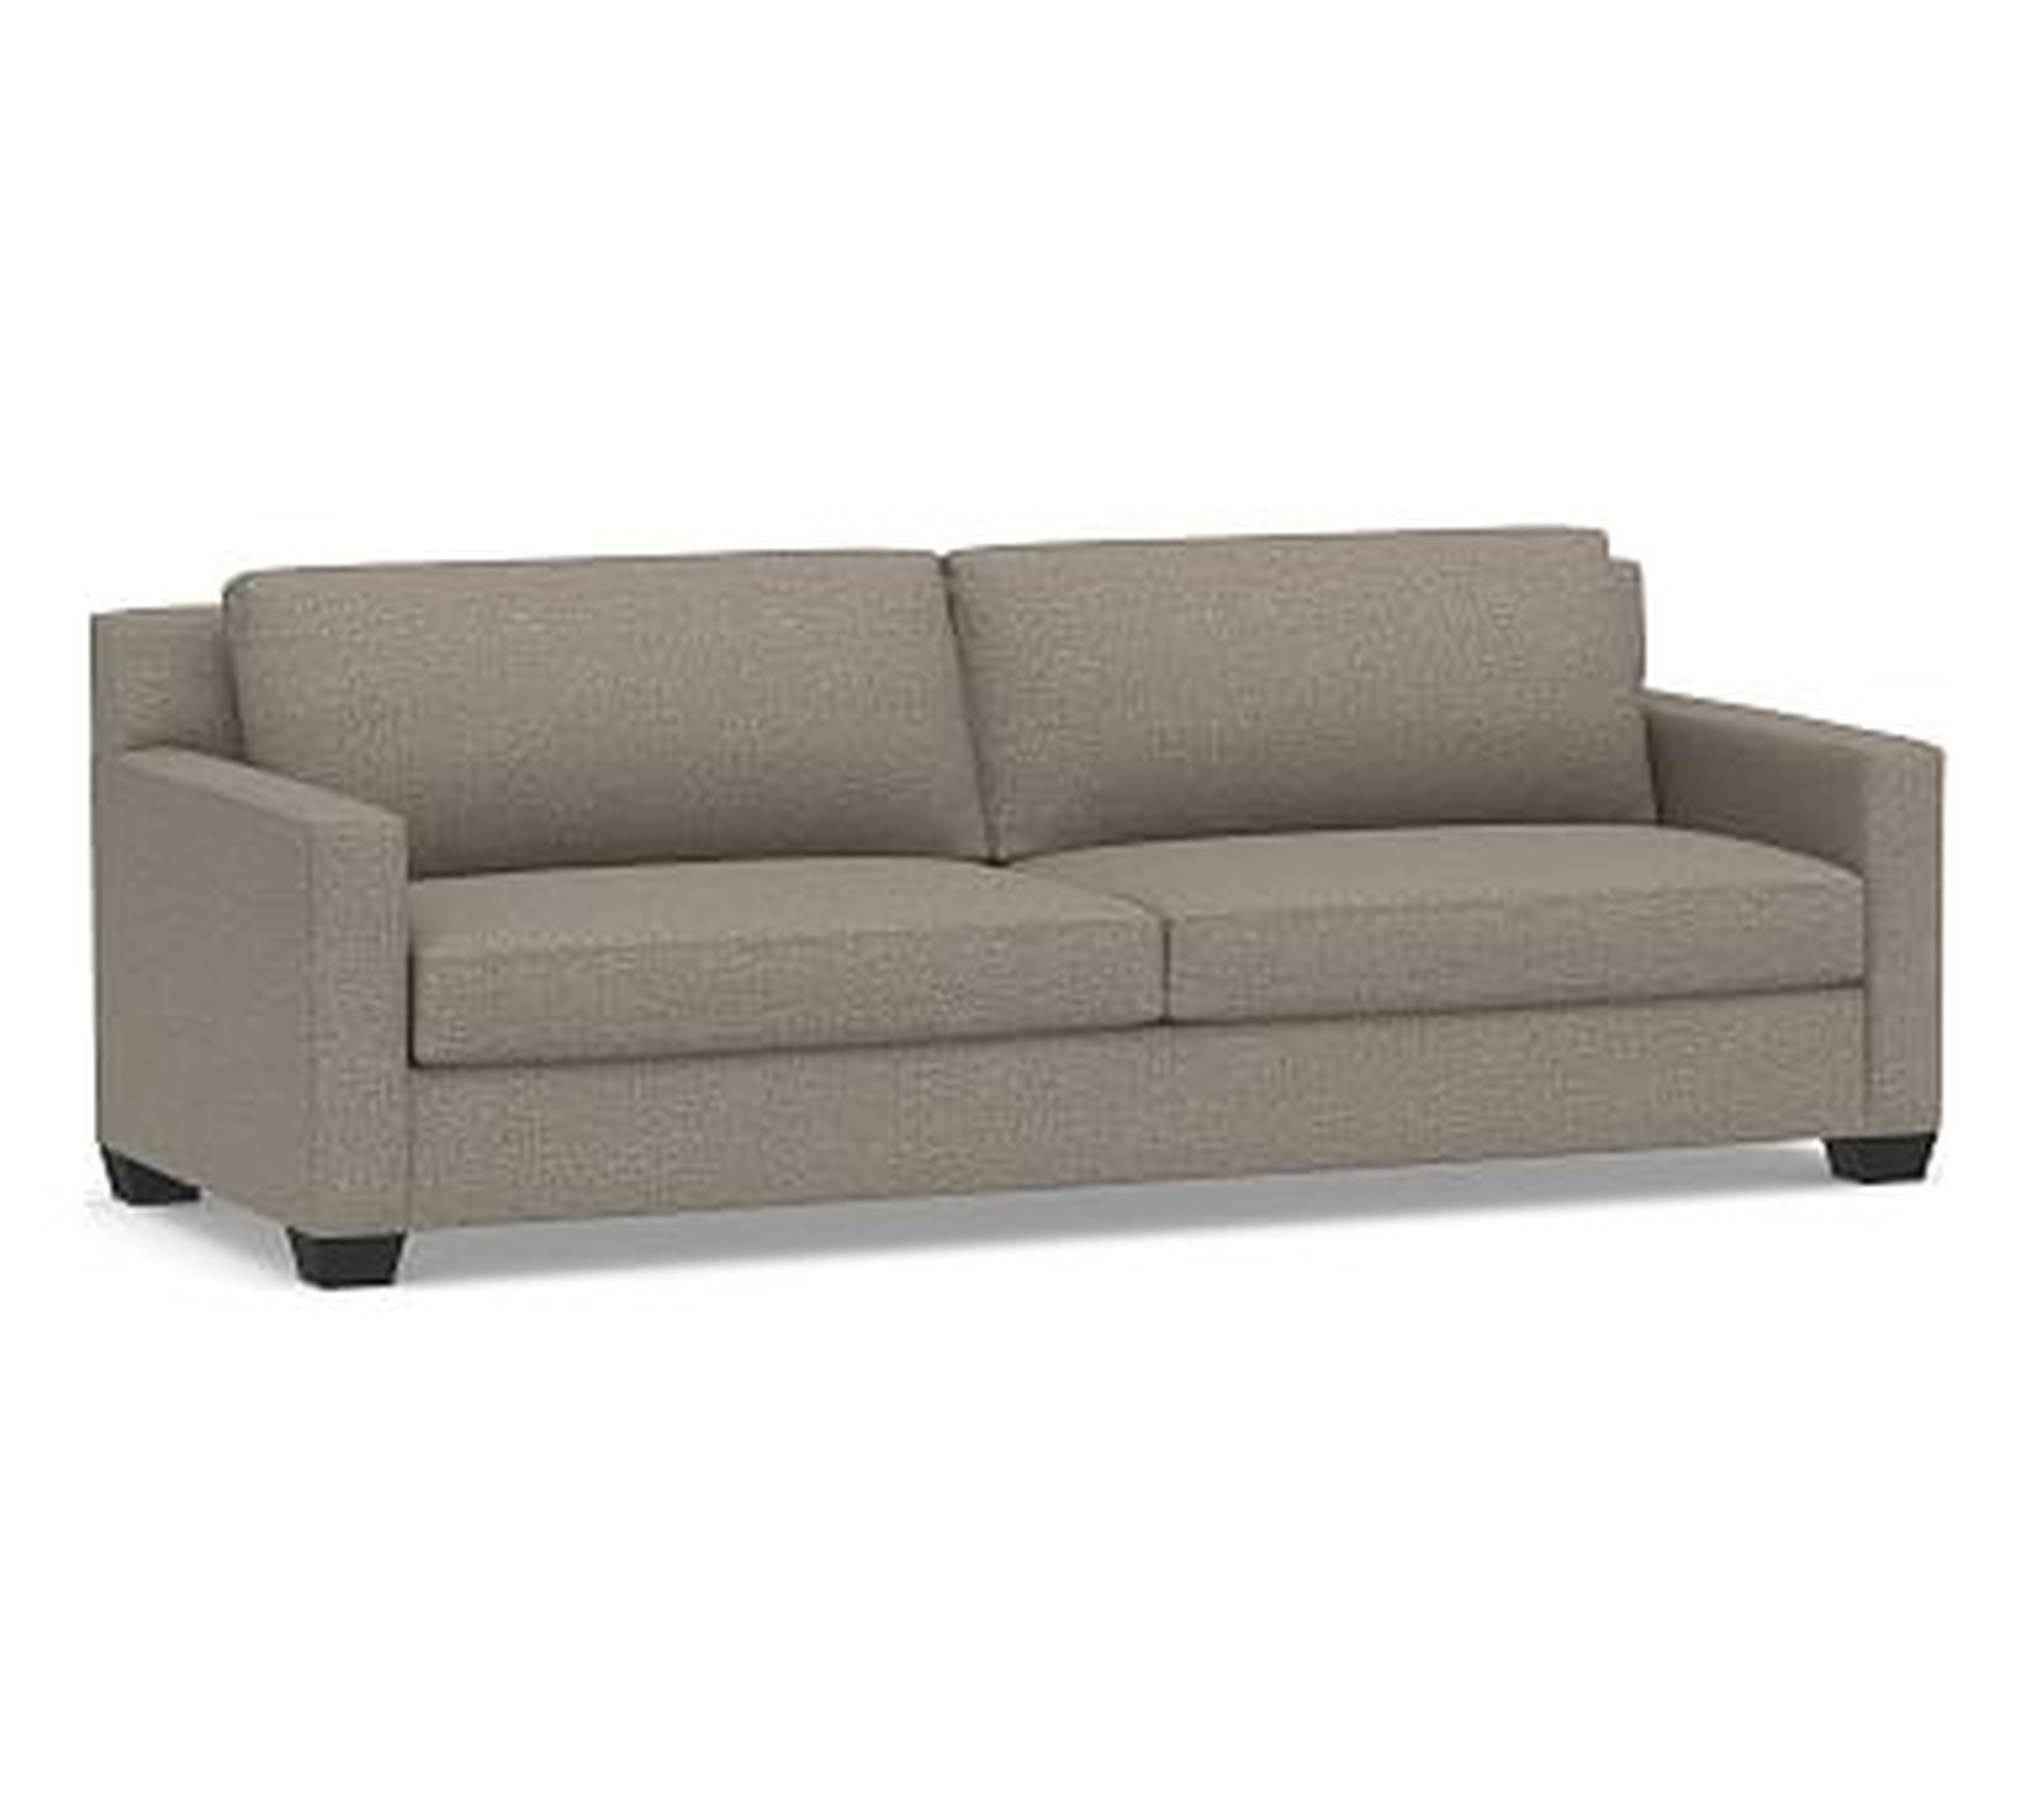 York Square Arm Upholstered Grand Sofa 95.5", Down Blend Wrapped Cushions, Performance Chateau Basketweave Light Gray - Pottery Barn